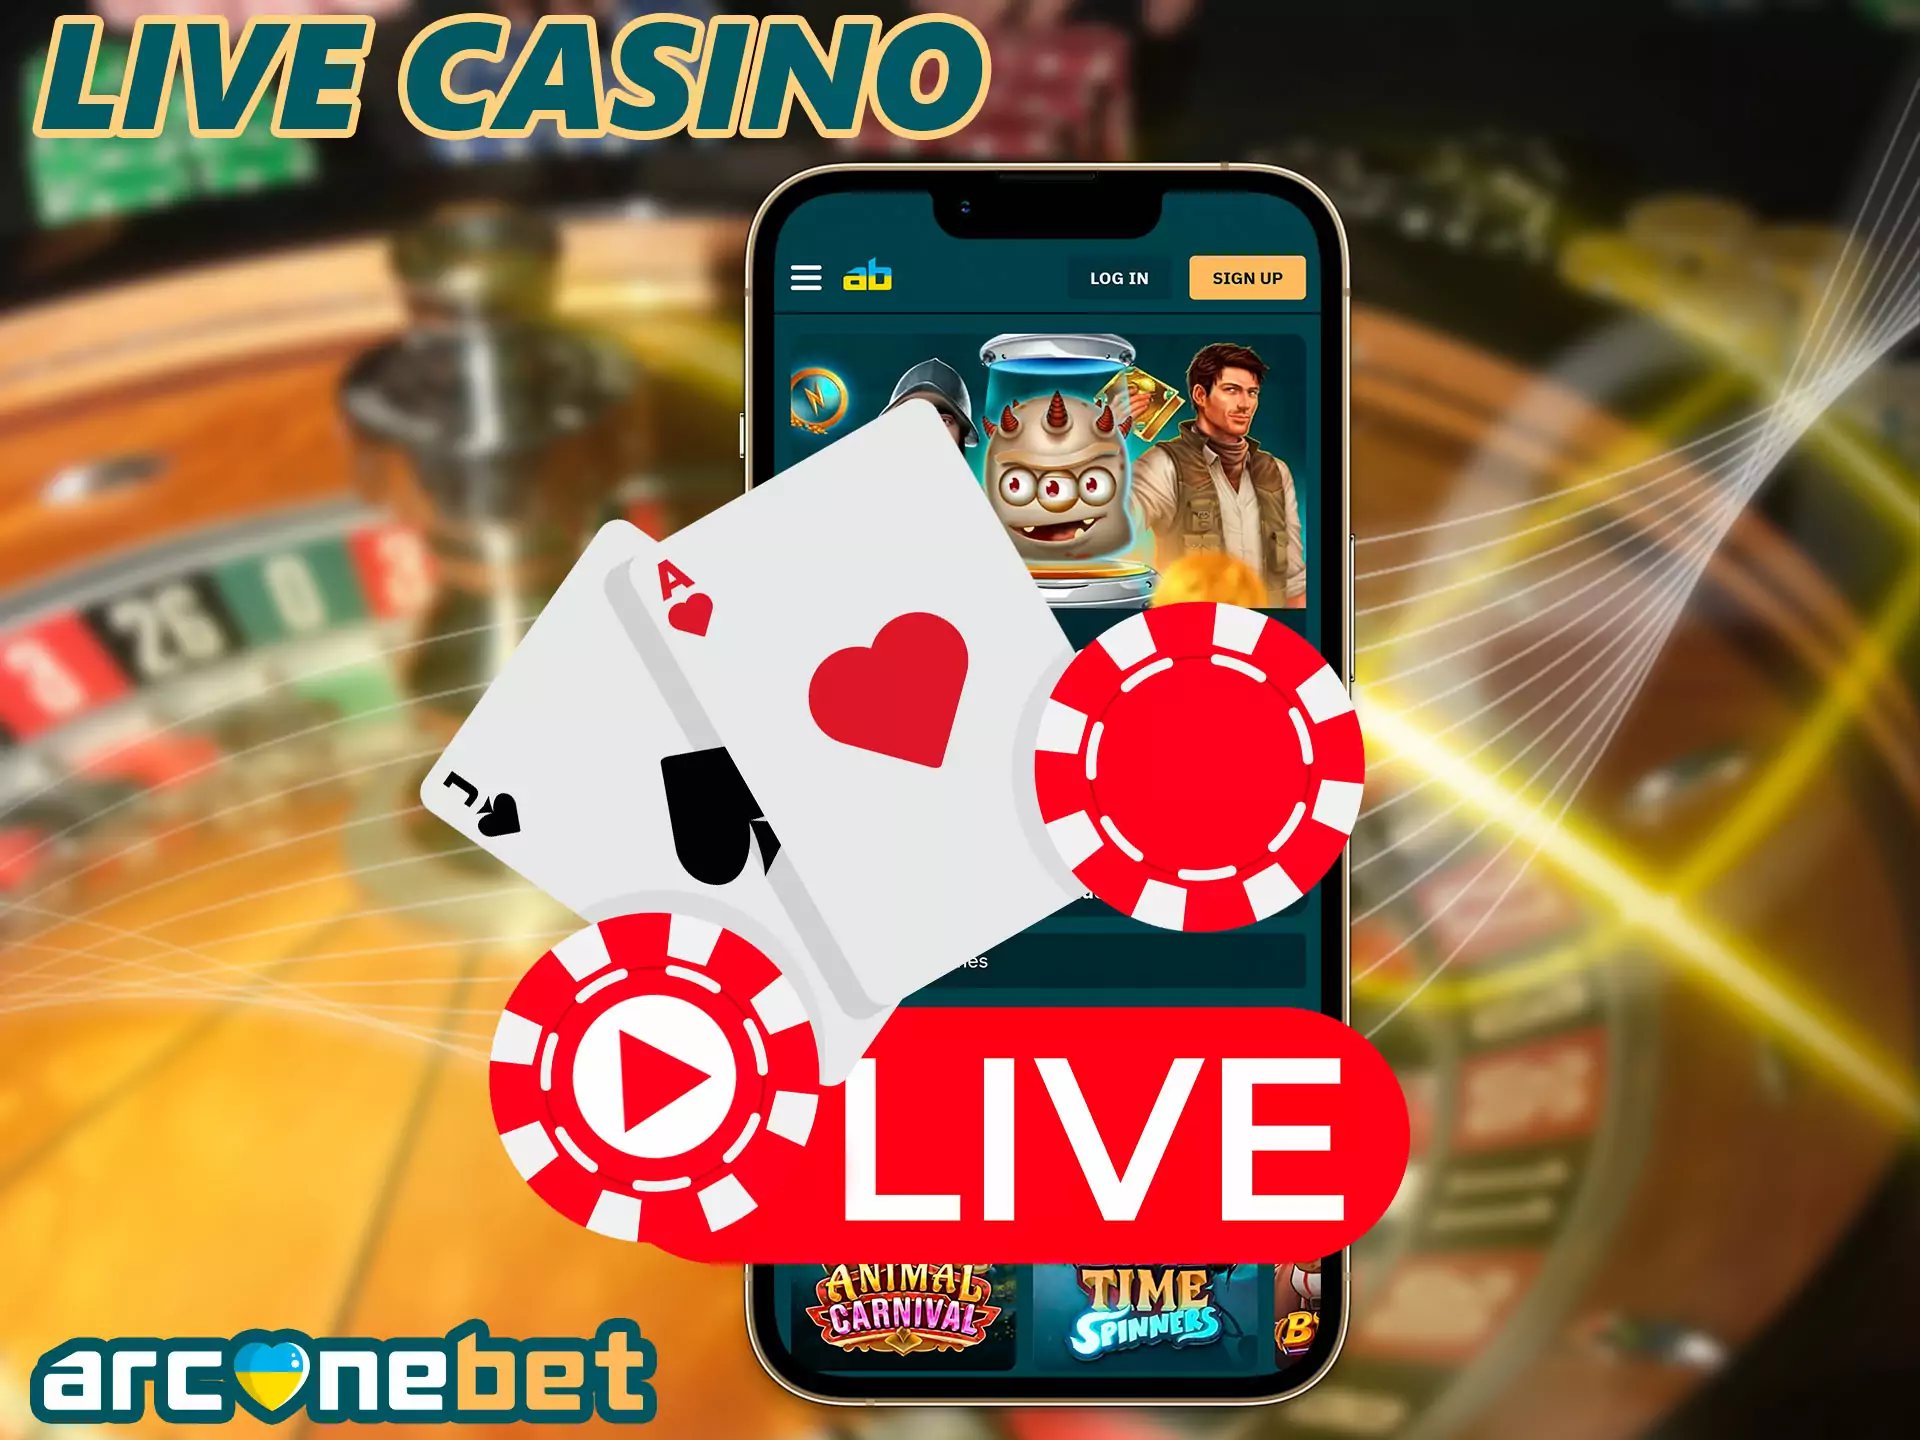 Already familiar to everyone, real-time gambling with live people is provided by the bookmaker, they are conveniently divided into categories, which simplifies the search.